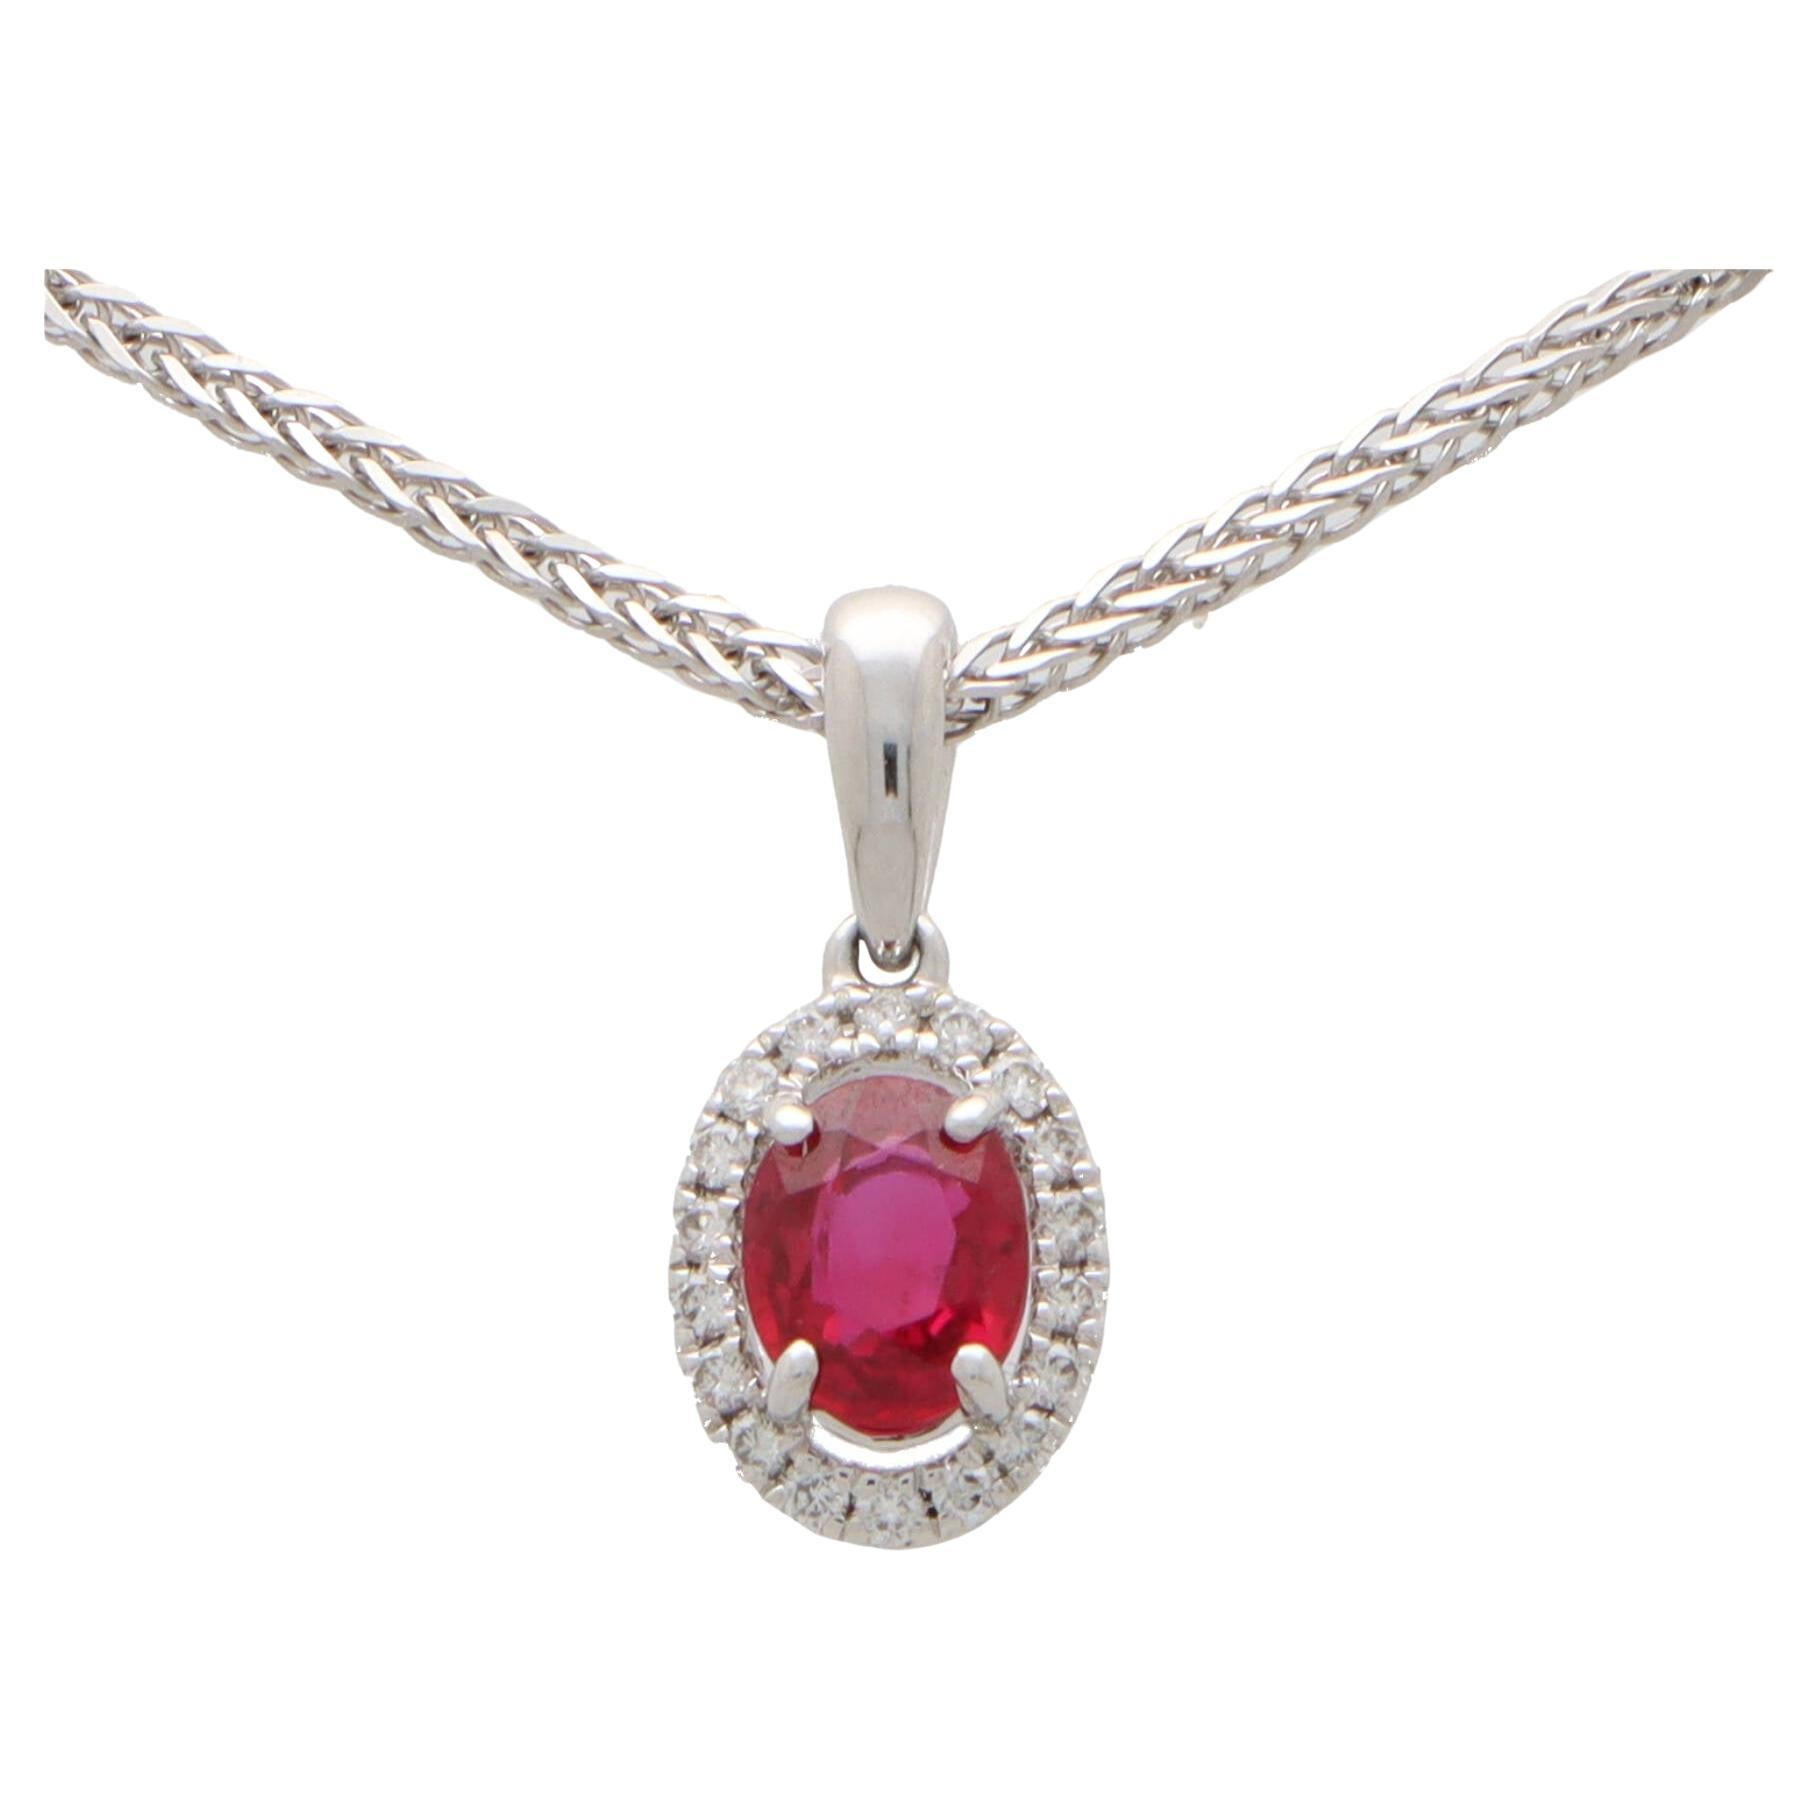  Ruby and Diamond Oval Halo Pendant Necklace Set in 18k White Gold